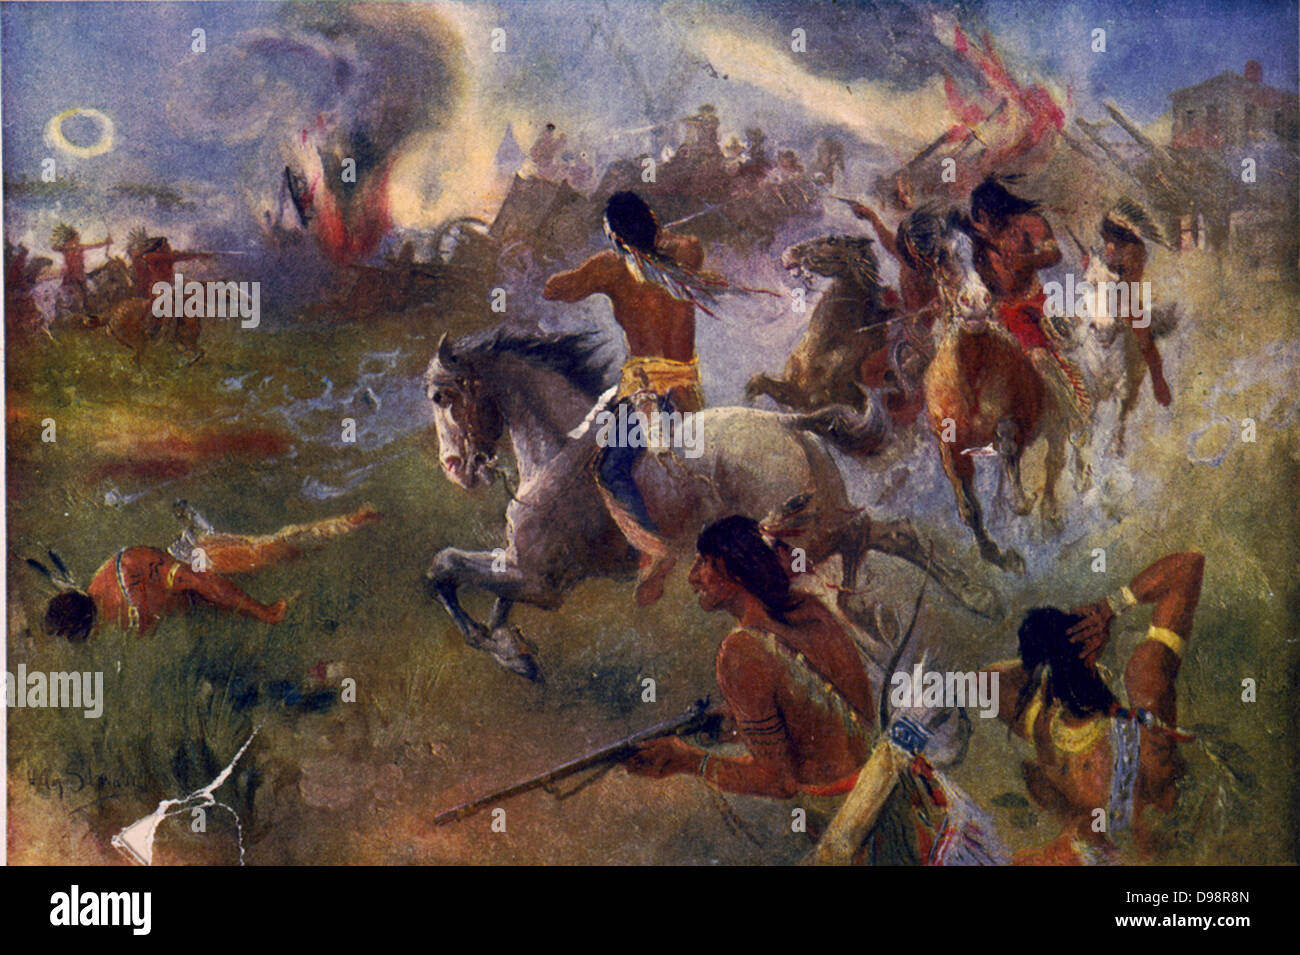 The Siege of New Ulm, Minnesota, 19 August 1862. Attack by Sioux tribesman from nearby reservation on townof 900 settlers. After painting by Heinrich Augustus Schwabe (1843-1916). Dakota War Native American Battle USA Stock Photo